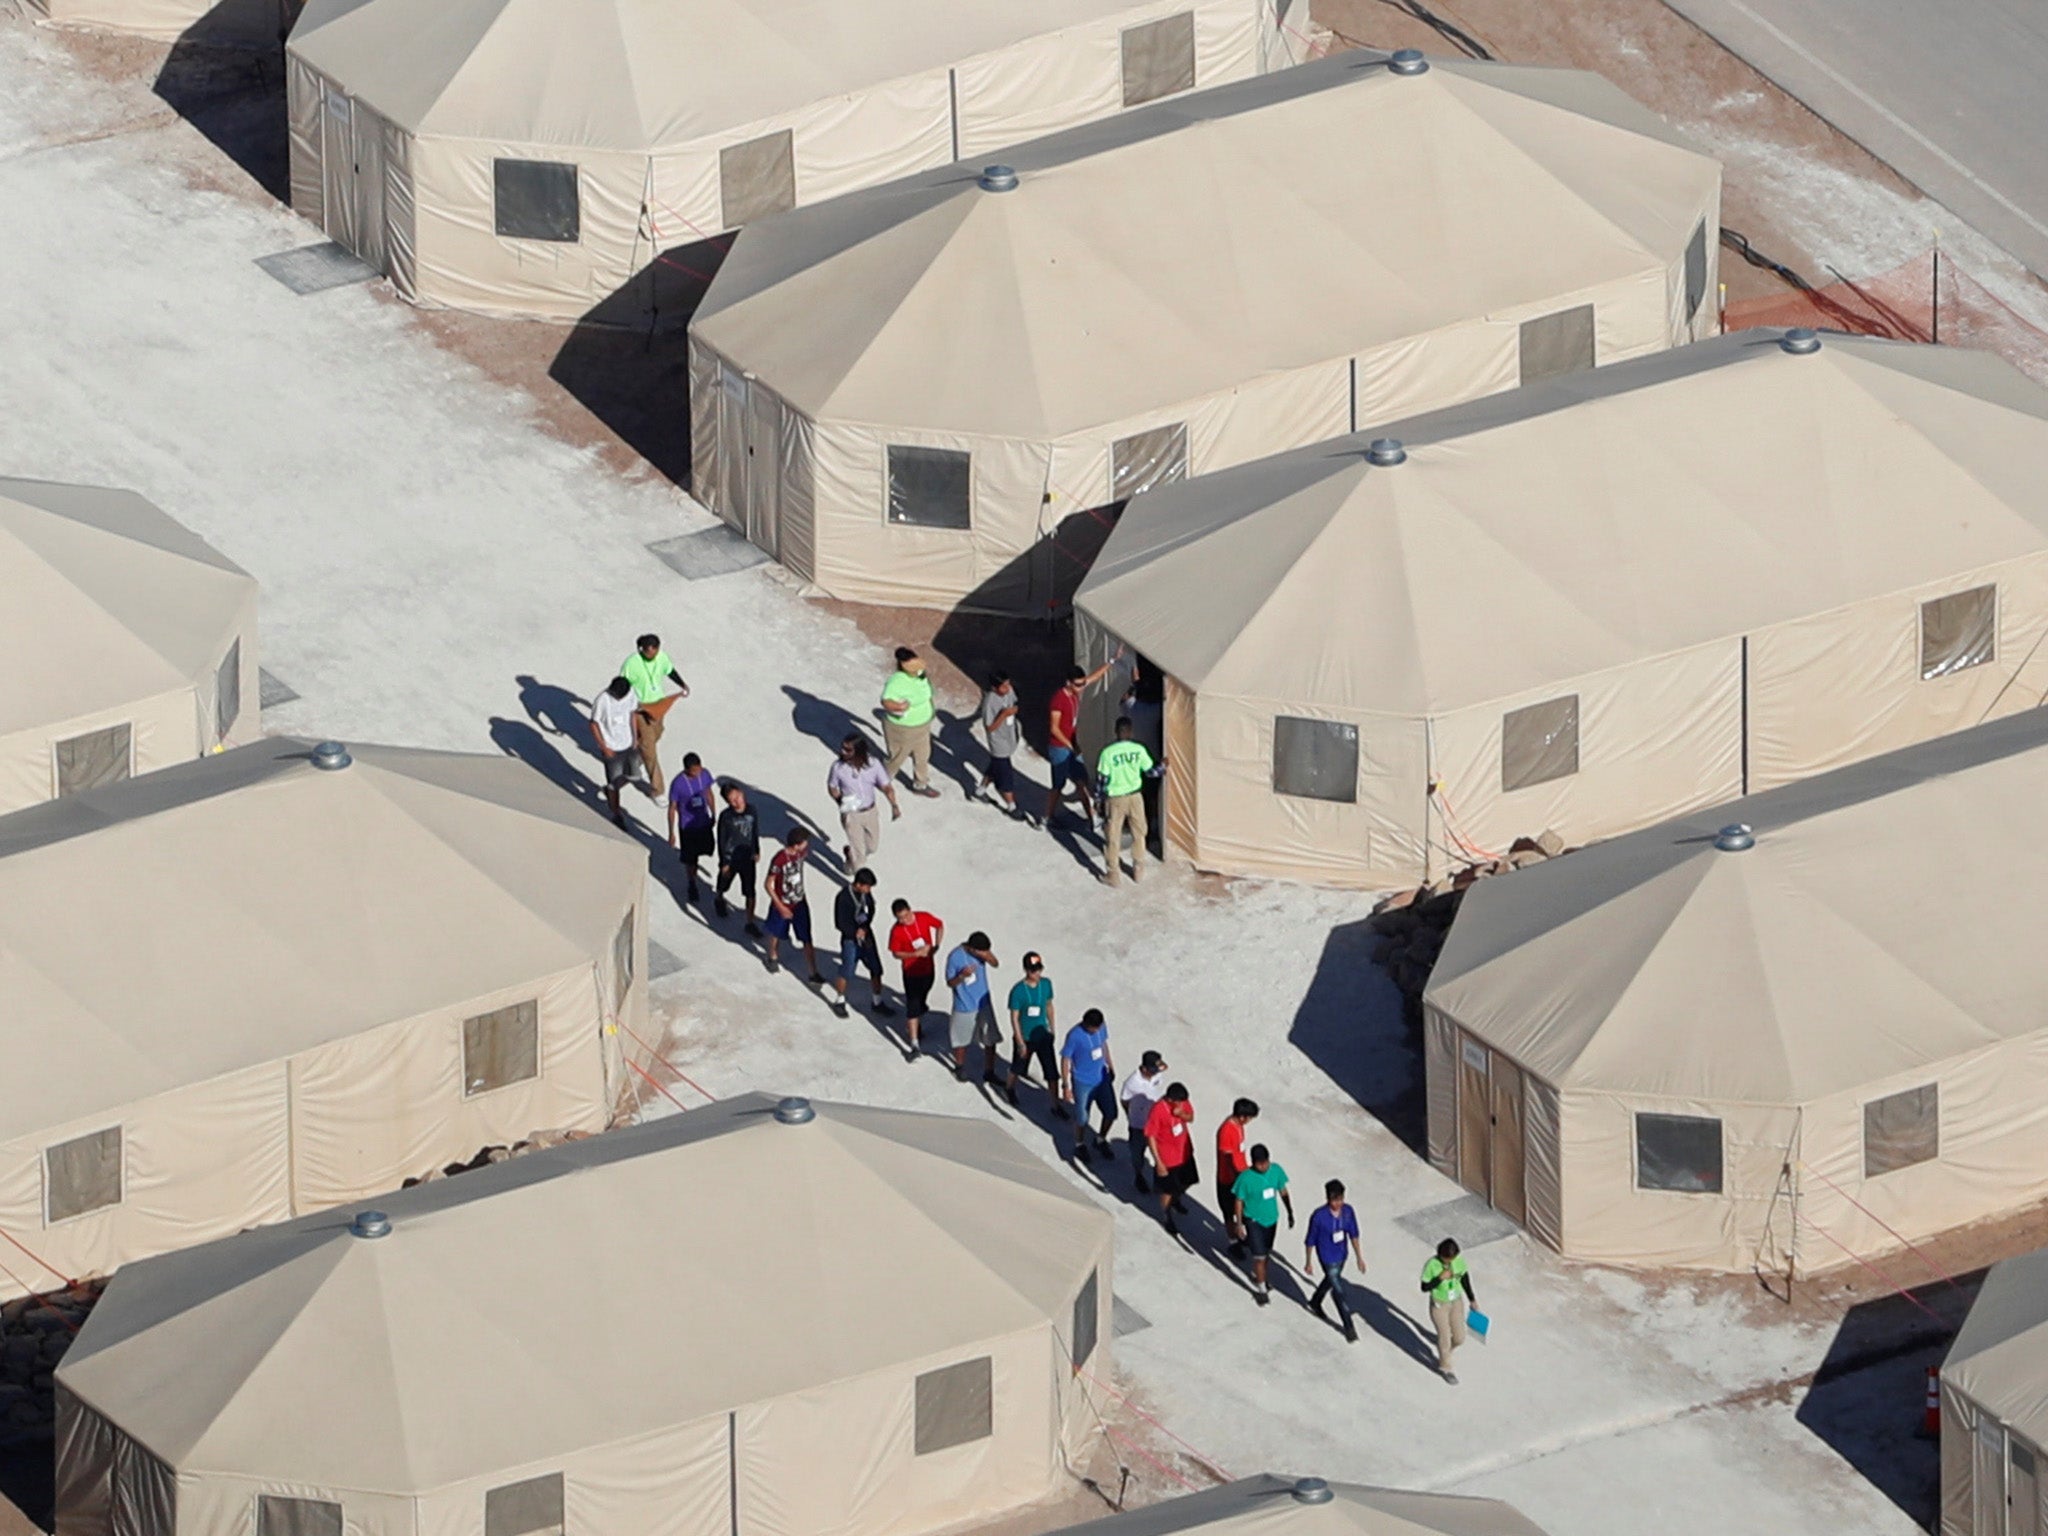 Children in America are being held in tents and converted supermarkets